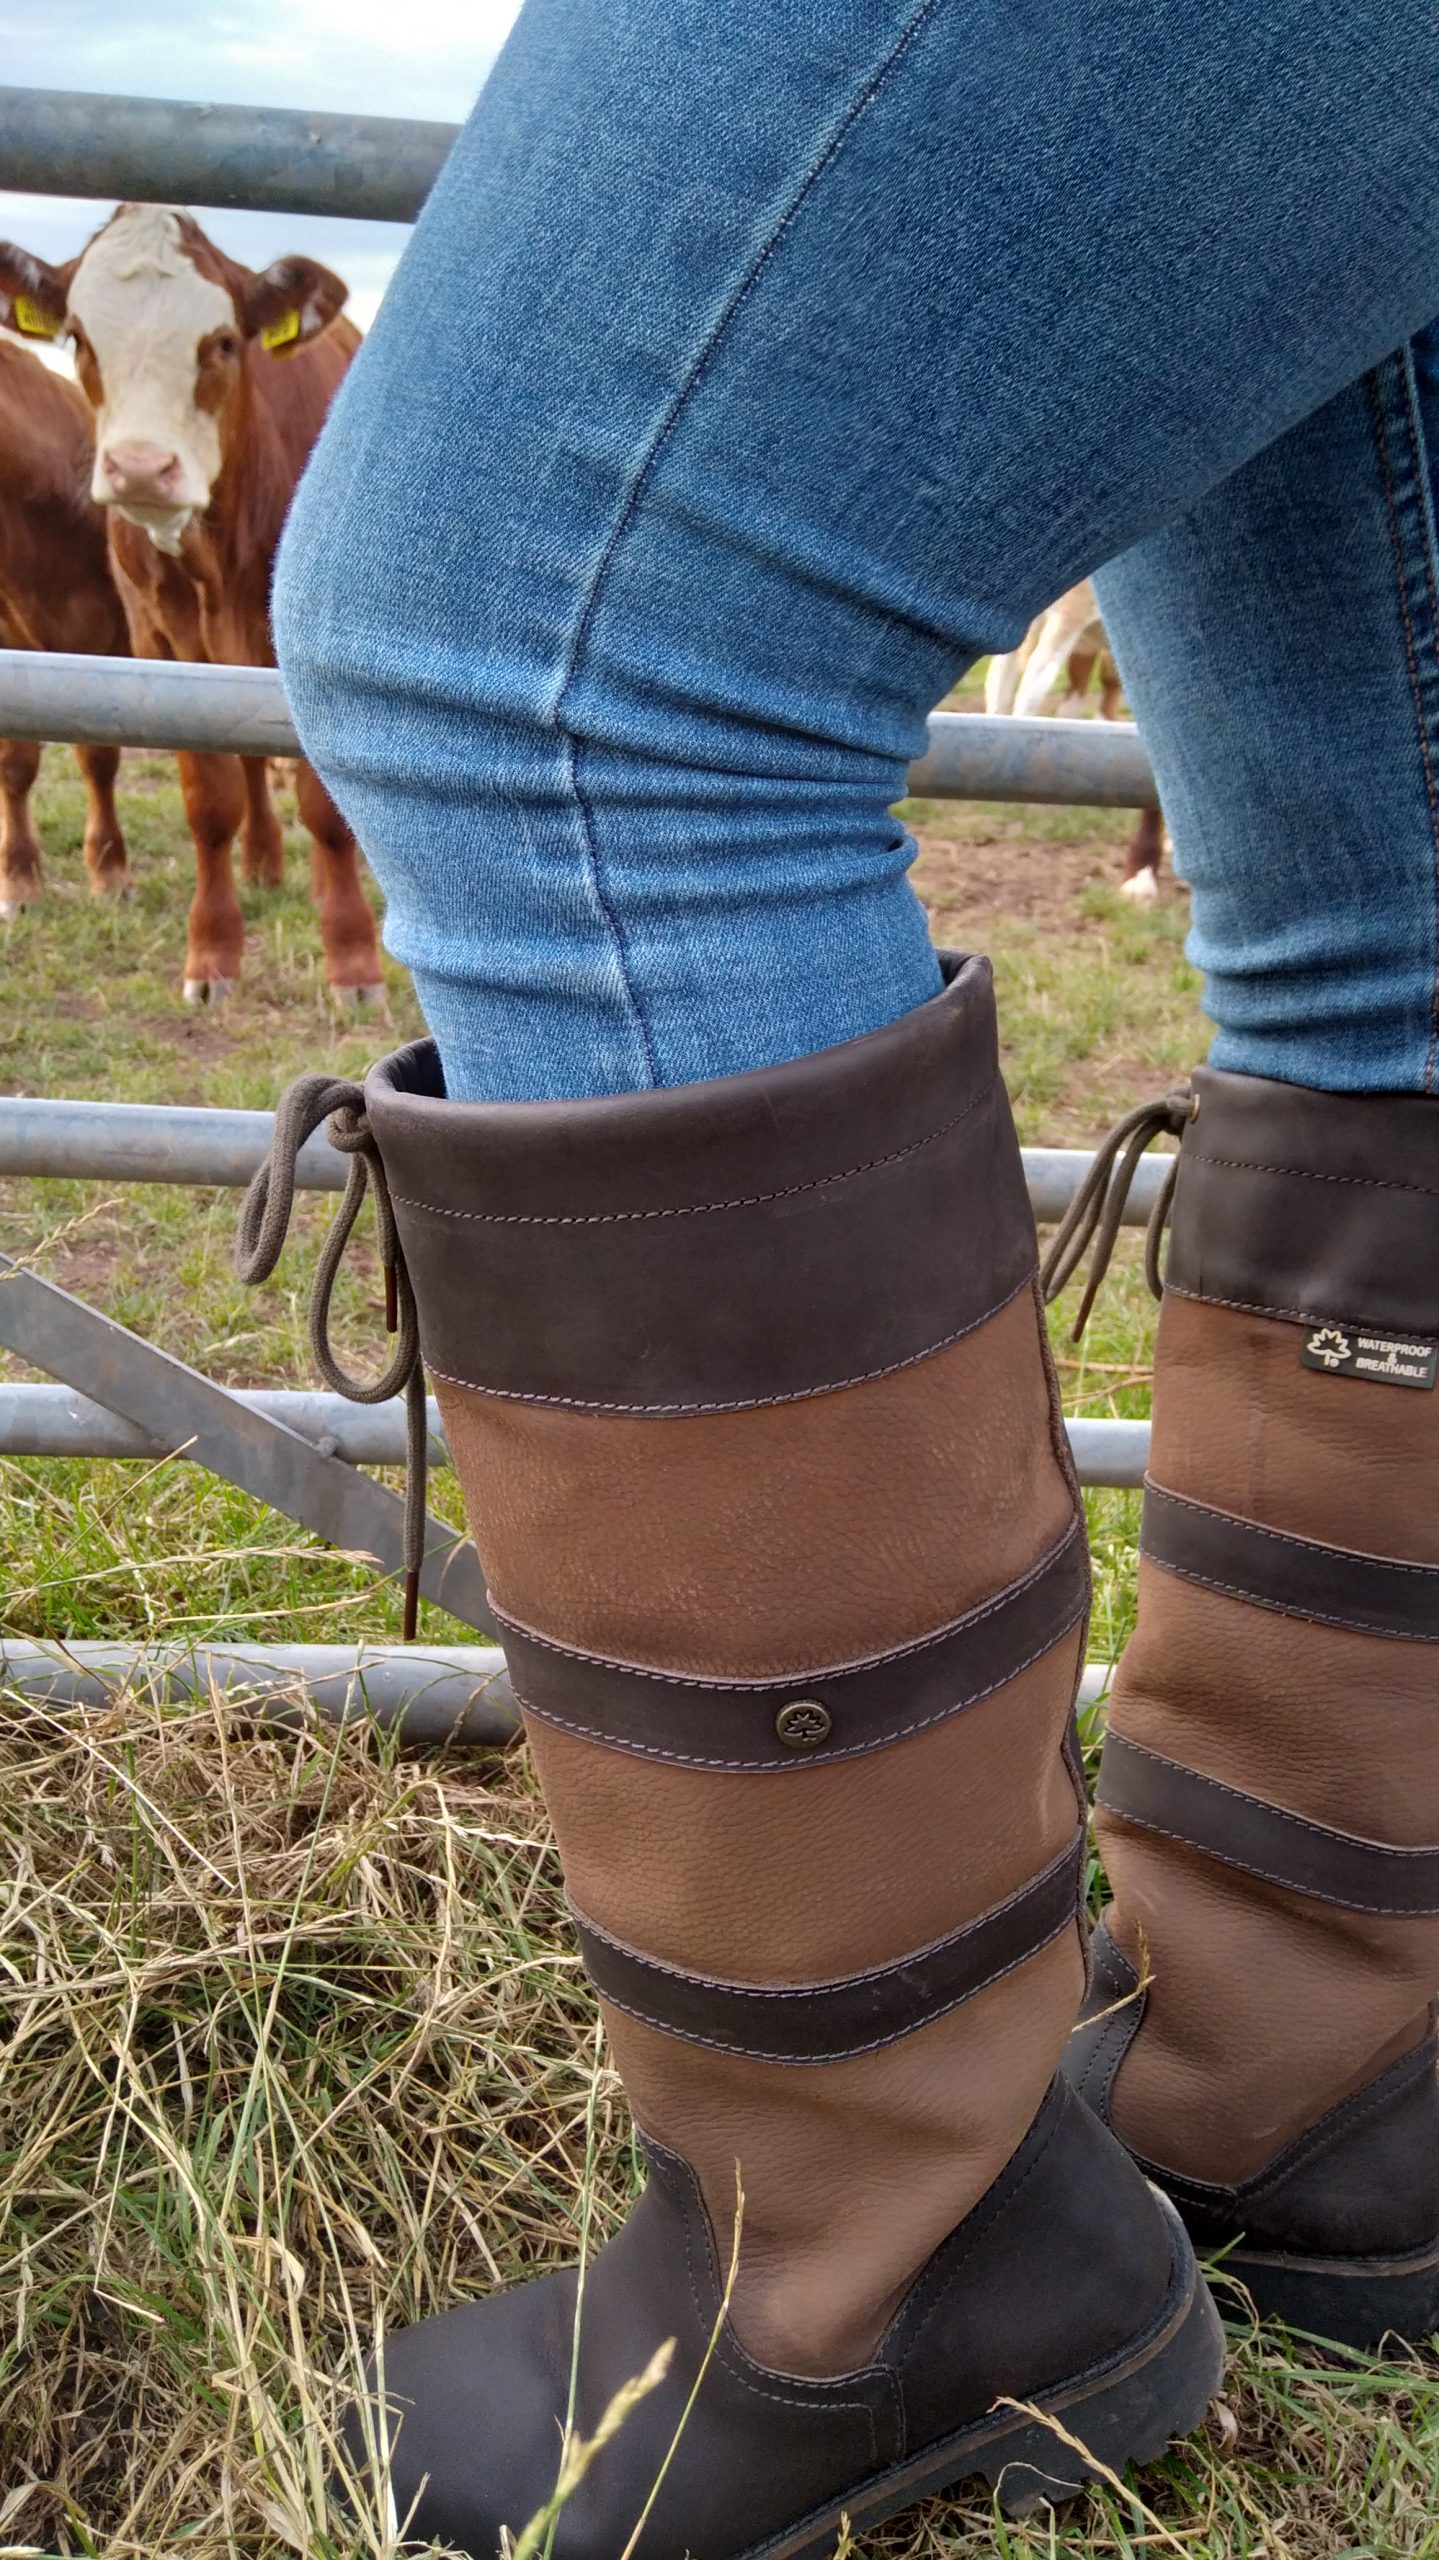 Cabotswood Footwear Country Boots - Equestrian Boots